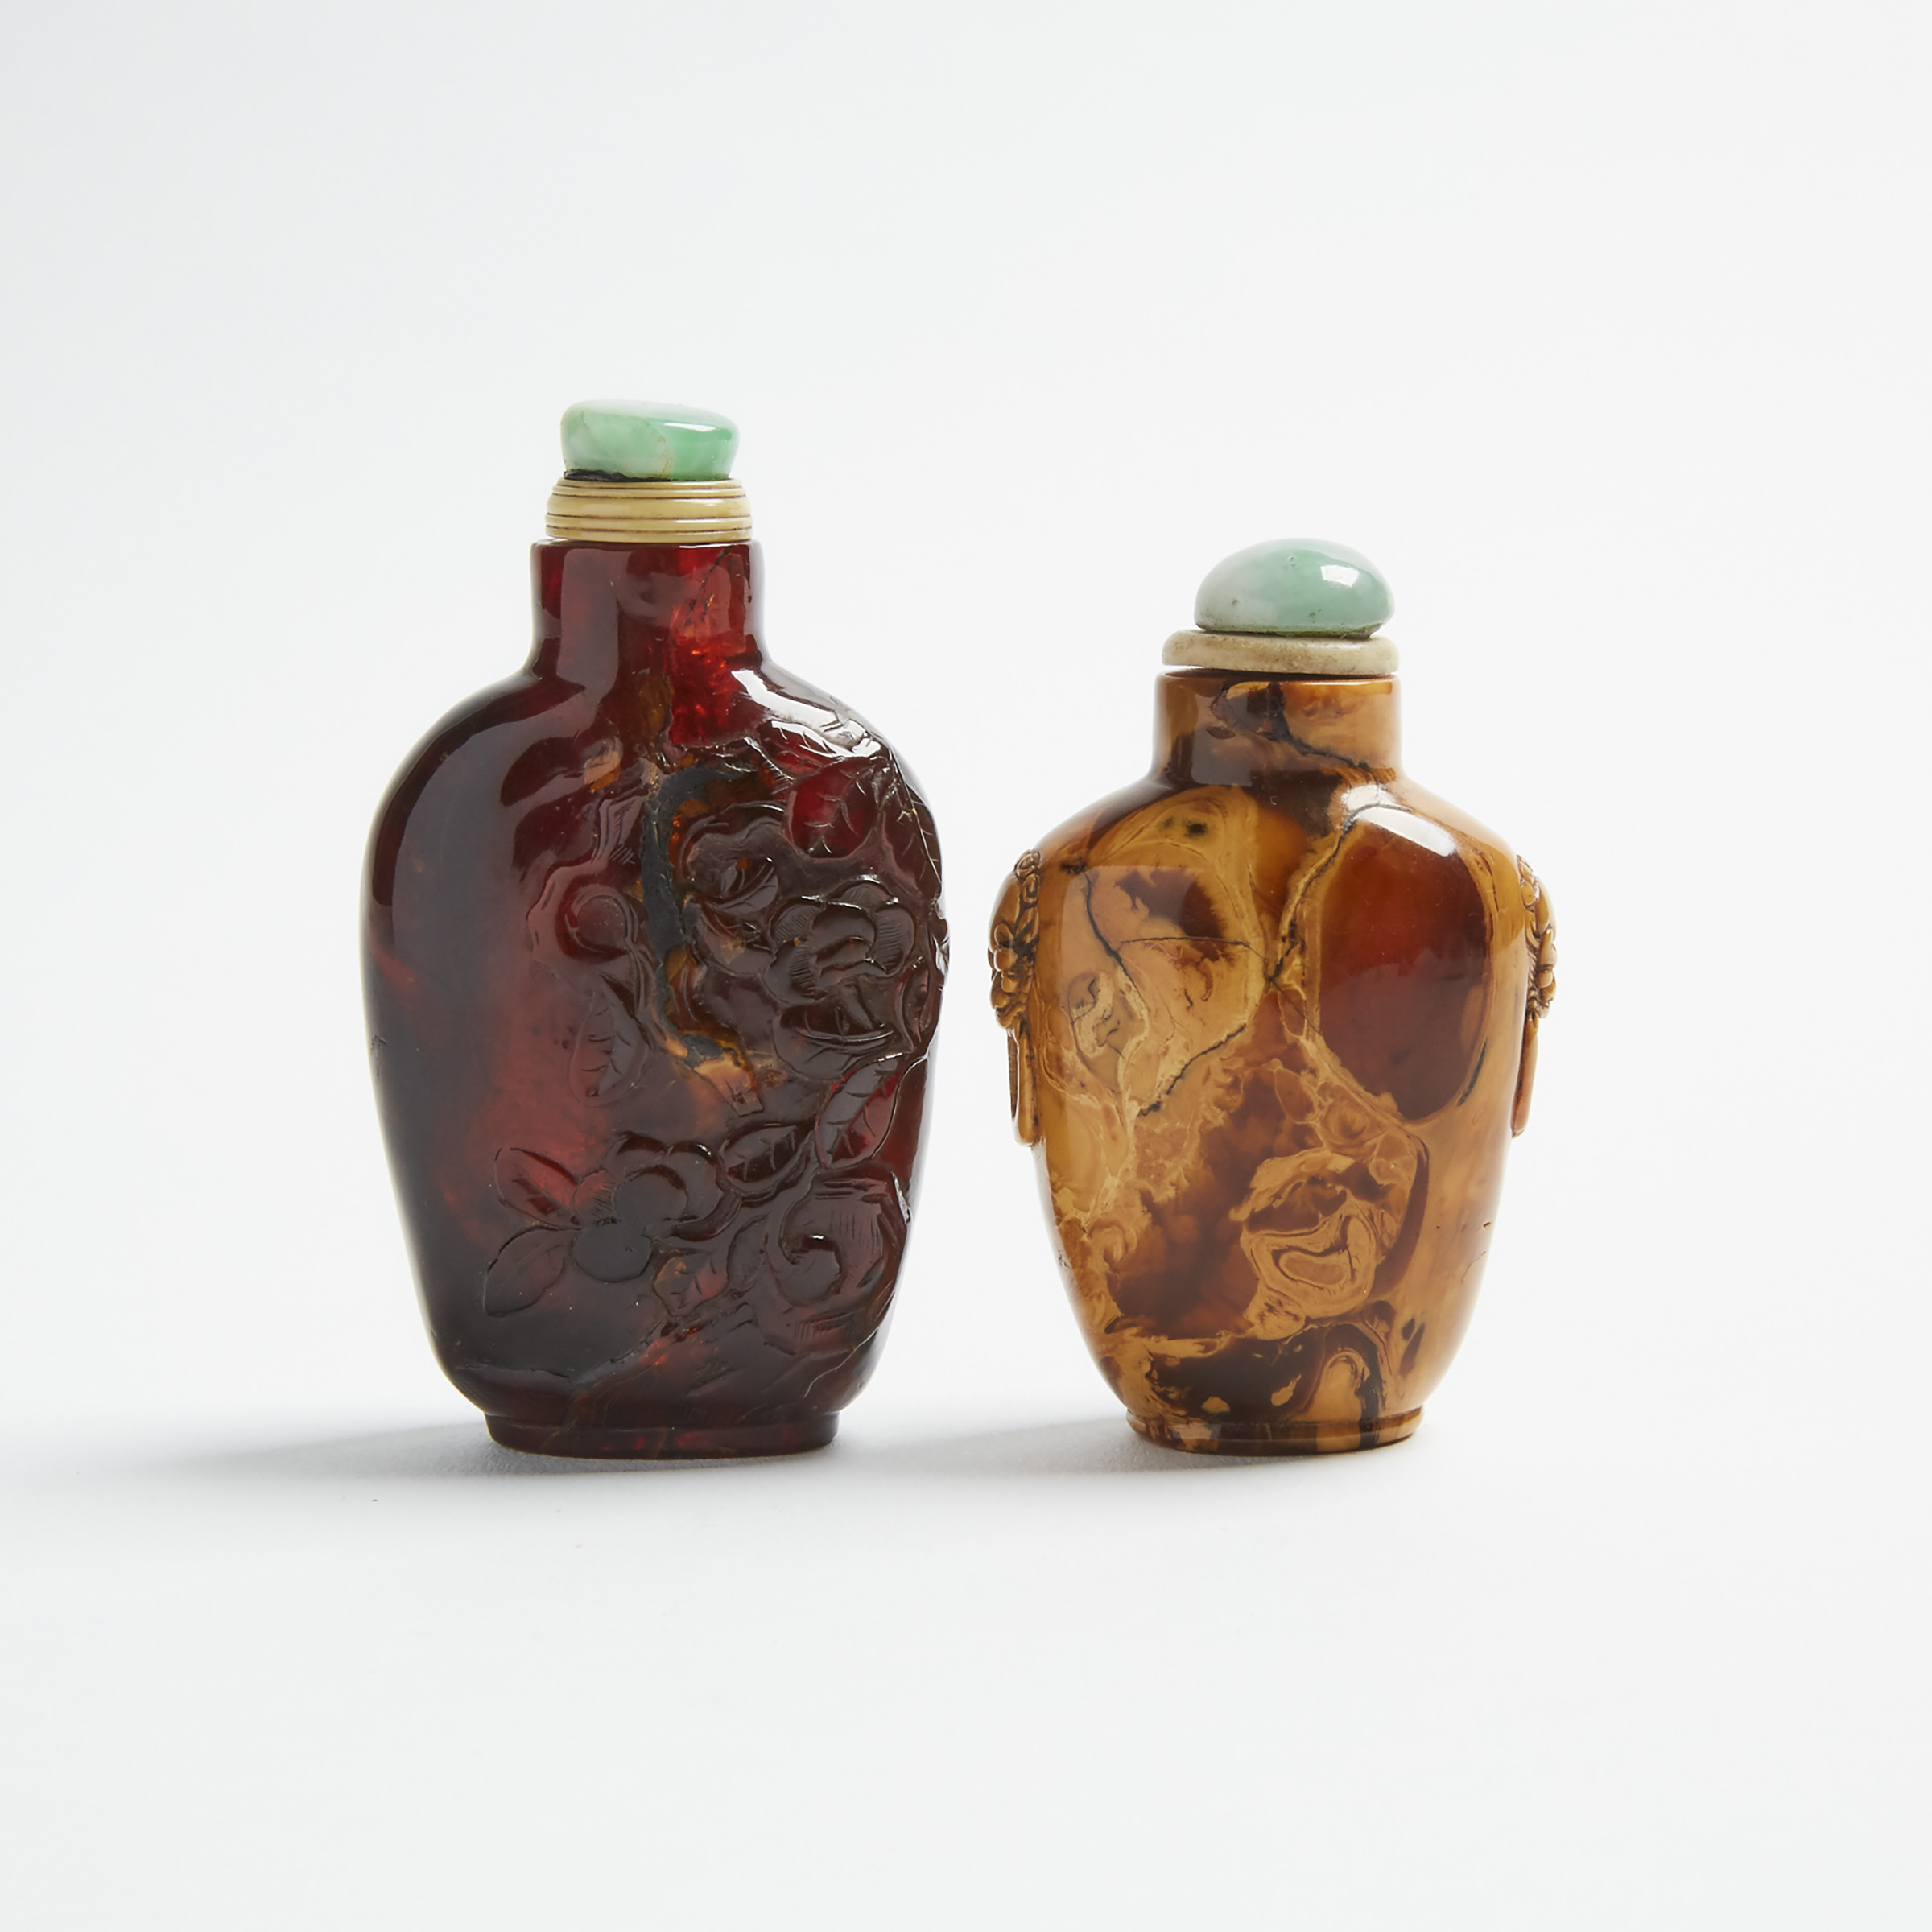 Two Amber Snuff Bottles, 19th/Early 20th Century